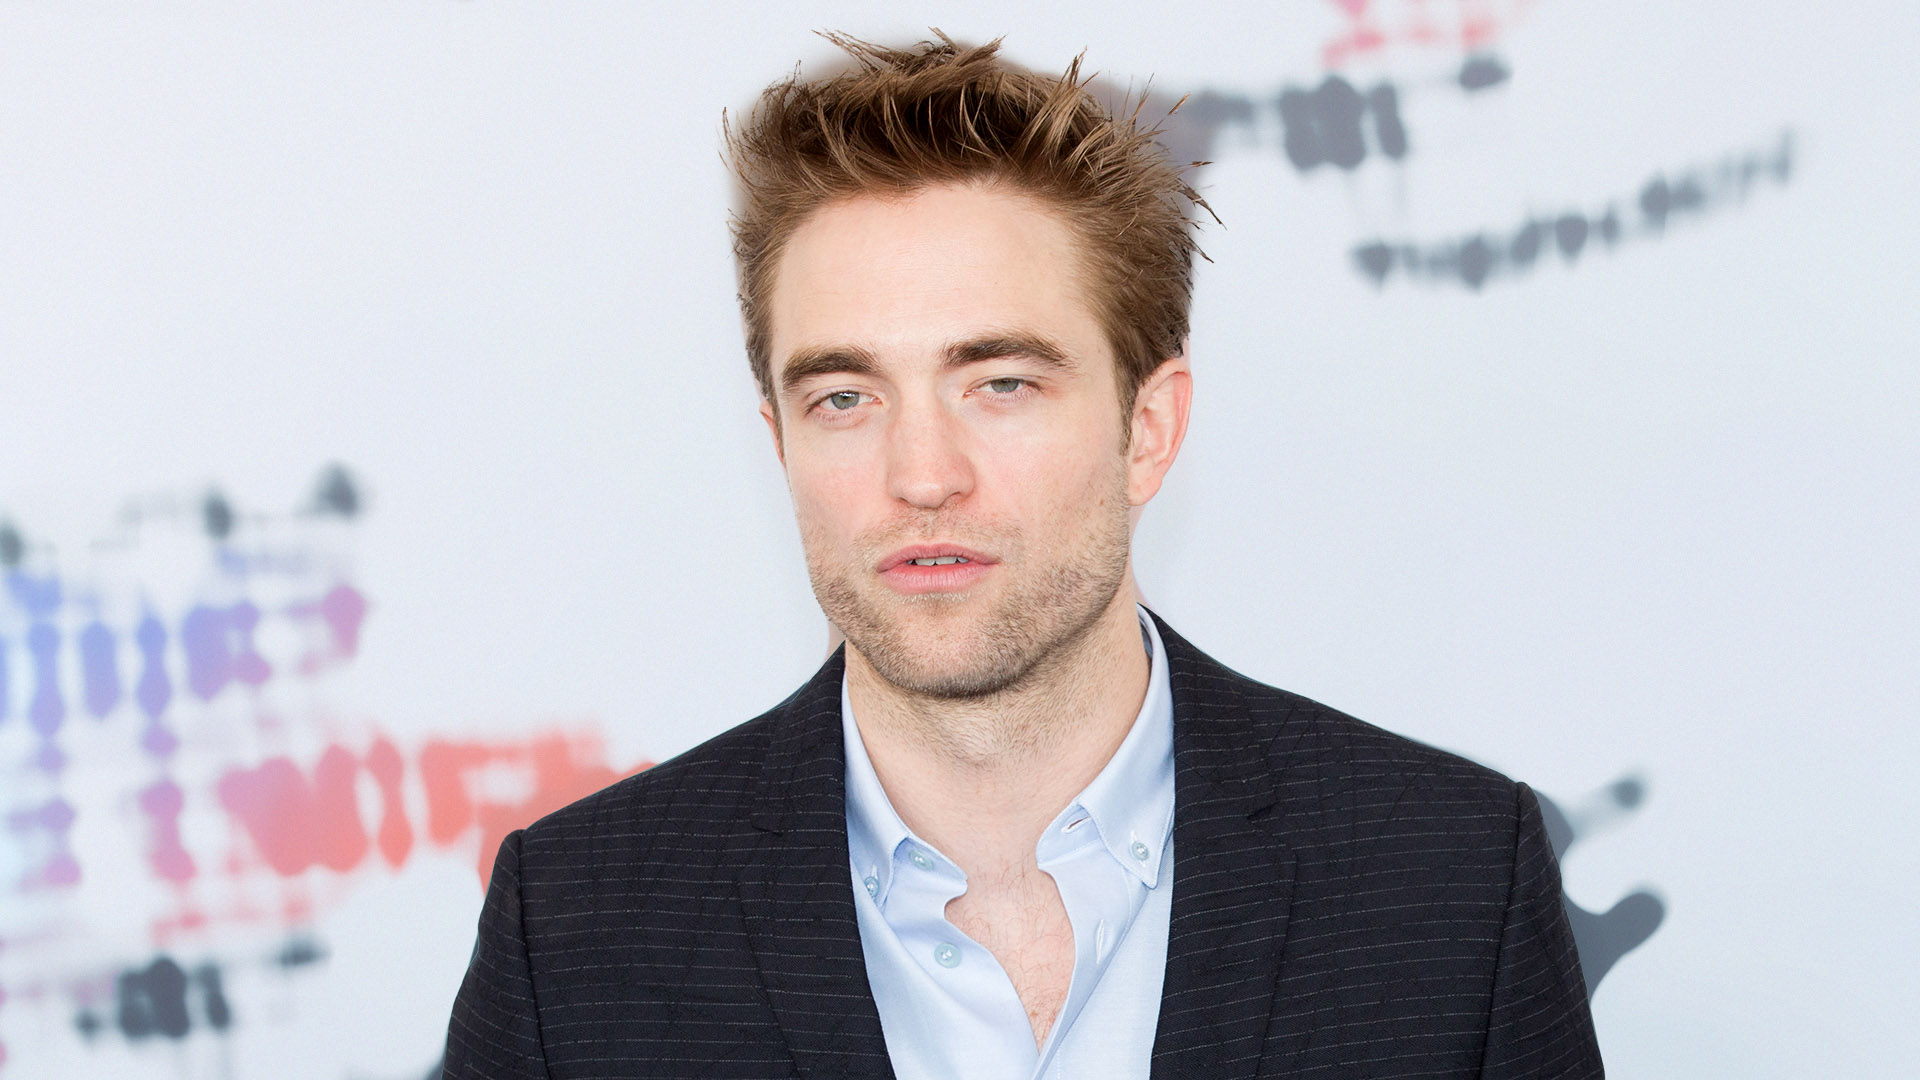 Robert Pattinson Called This Movie 'Torture' - and We Can't Help But Agree